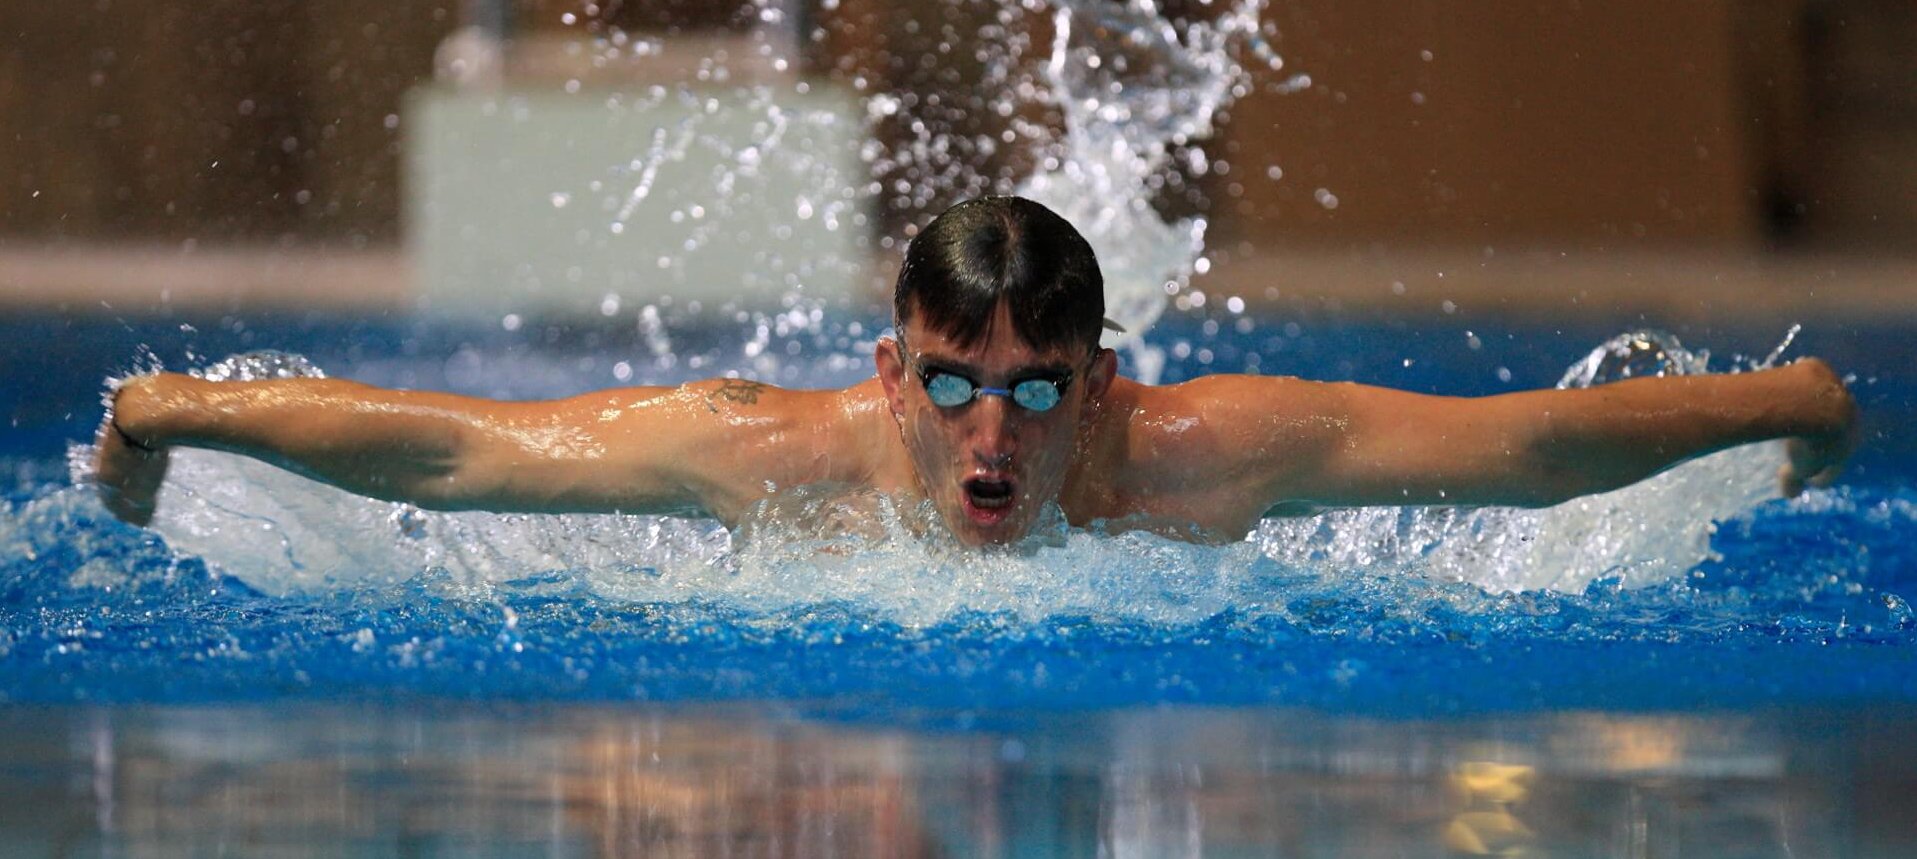 Swimmer doing butterfly stroke with arms outstretched